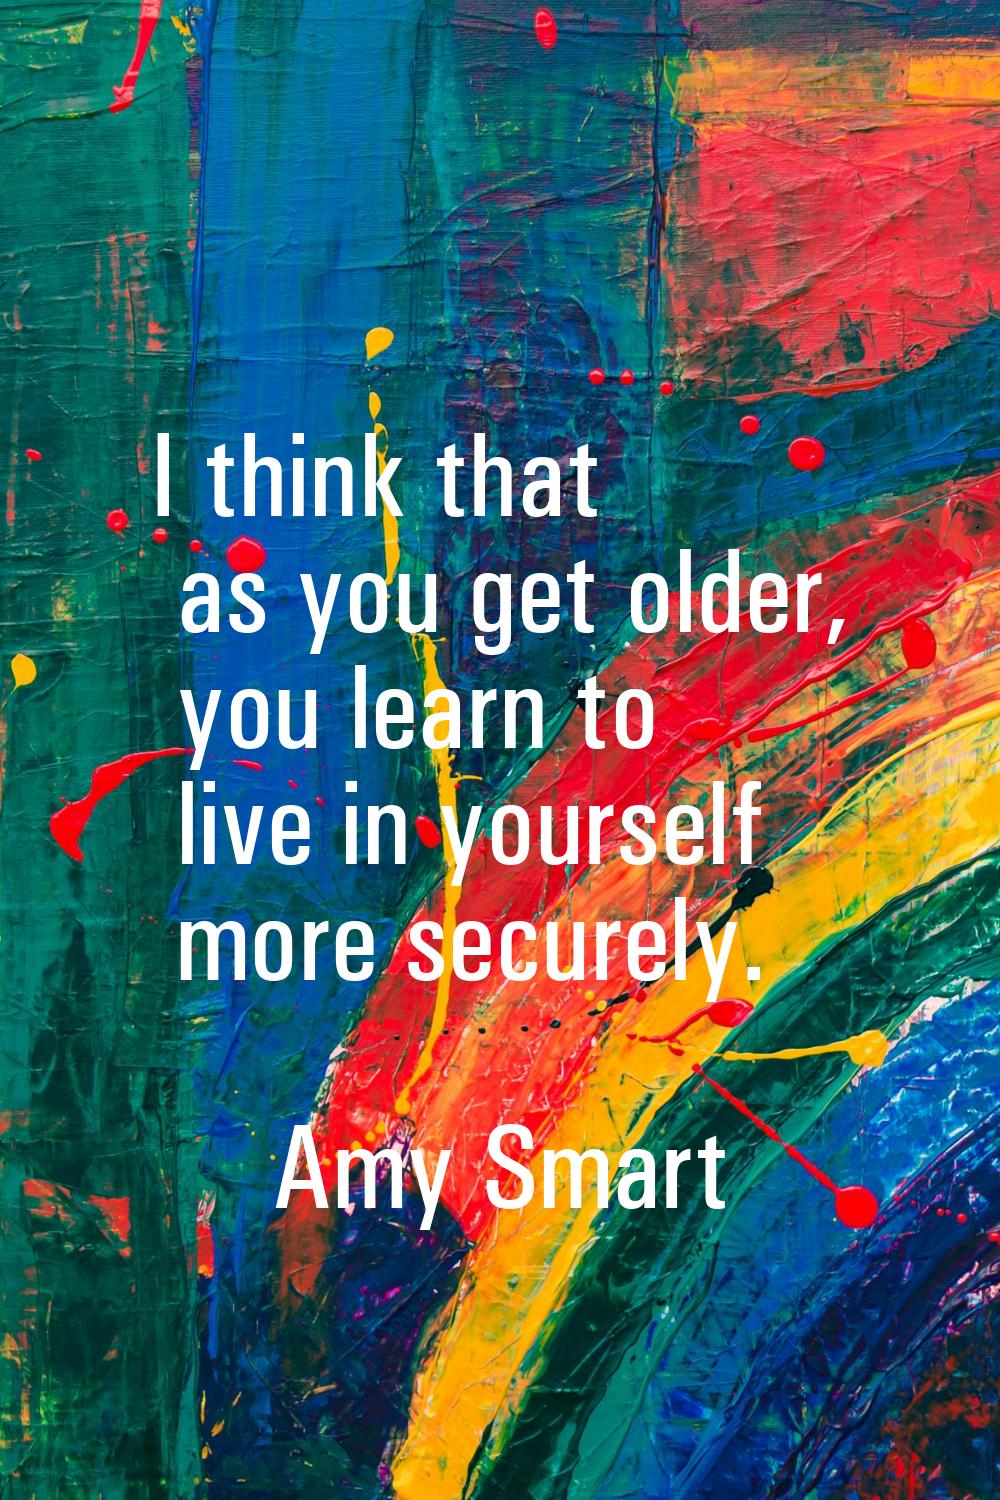 I think that as you get older, you learn to live in yourself more securely.